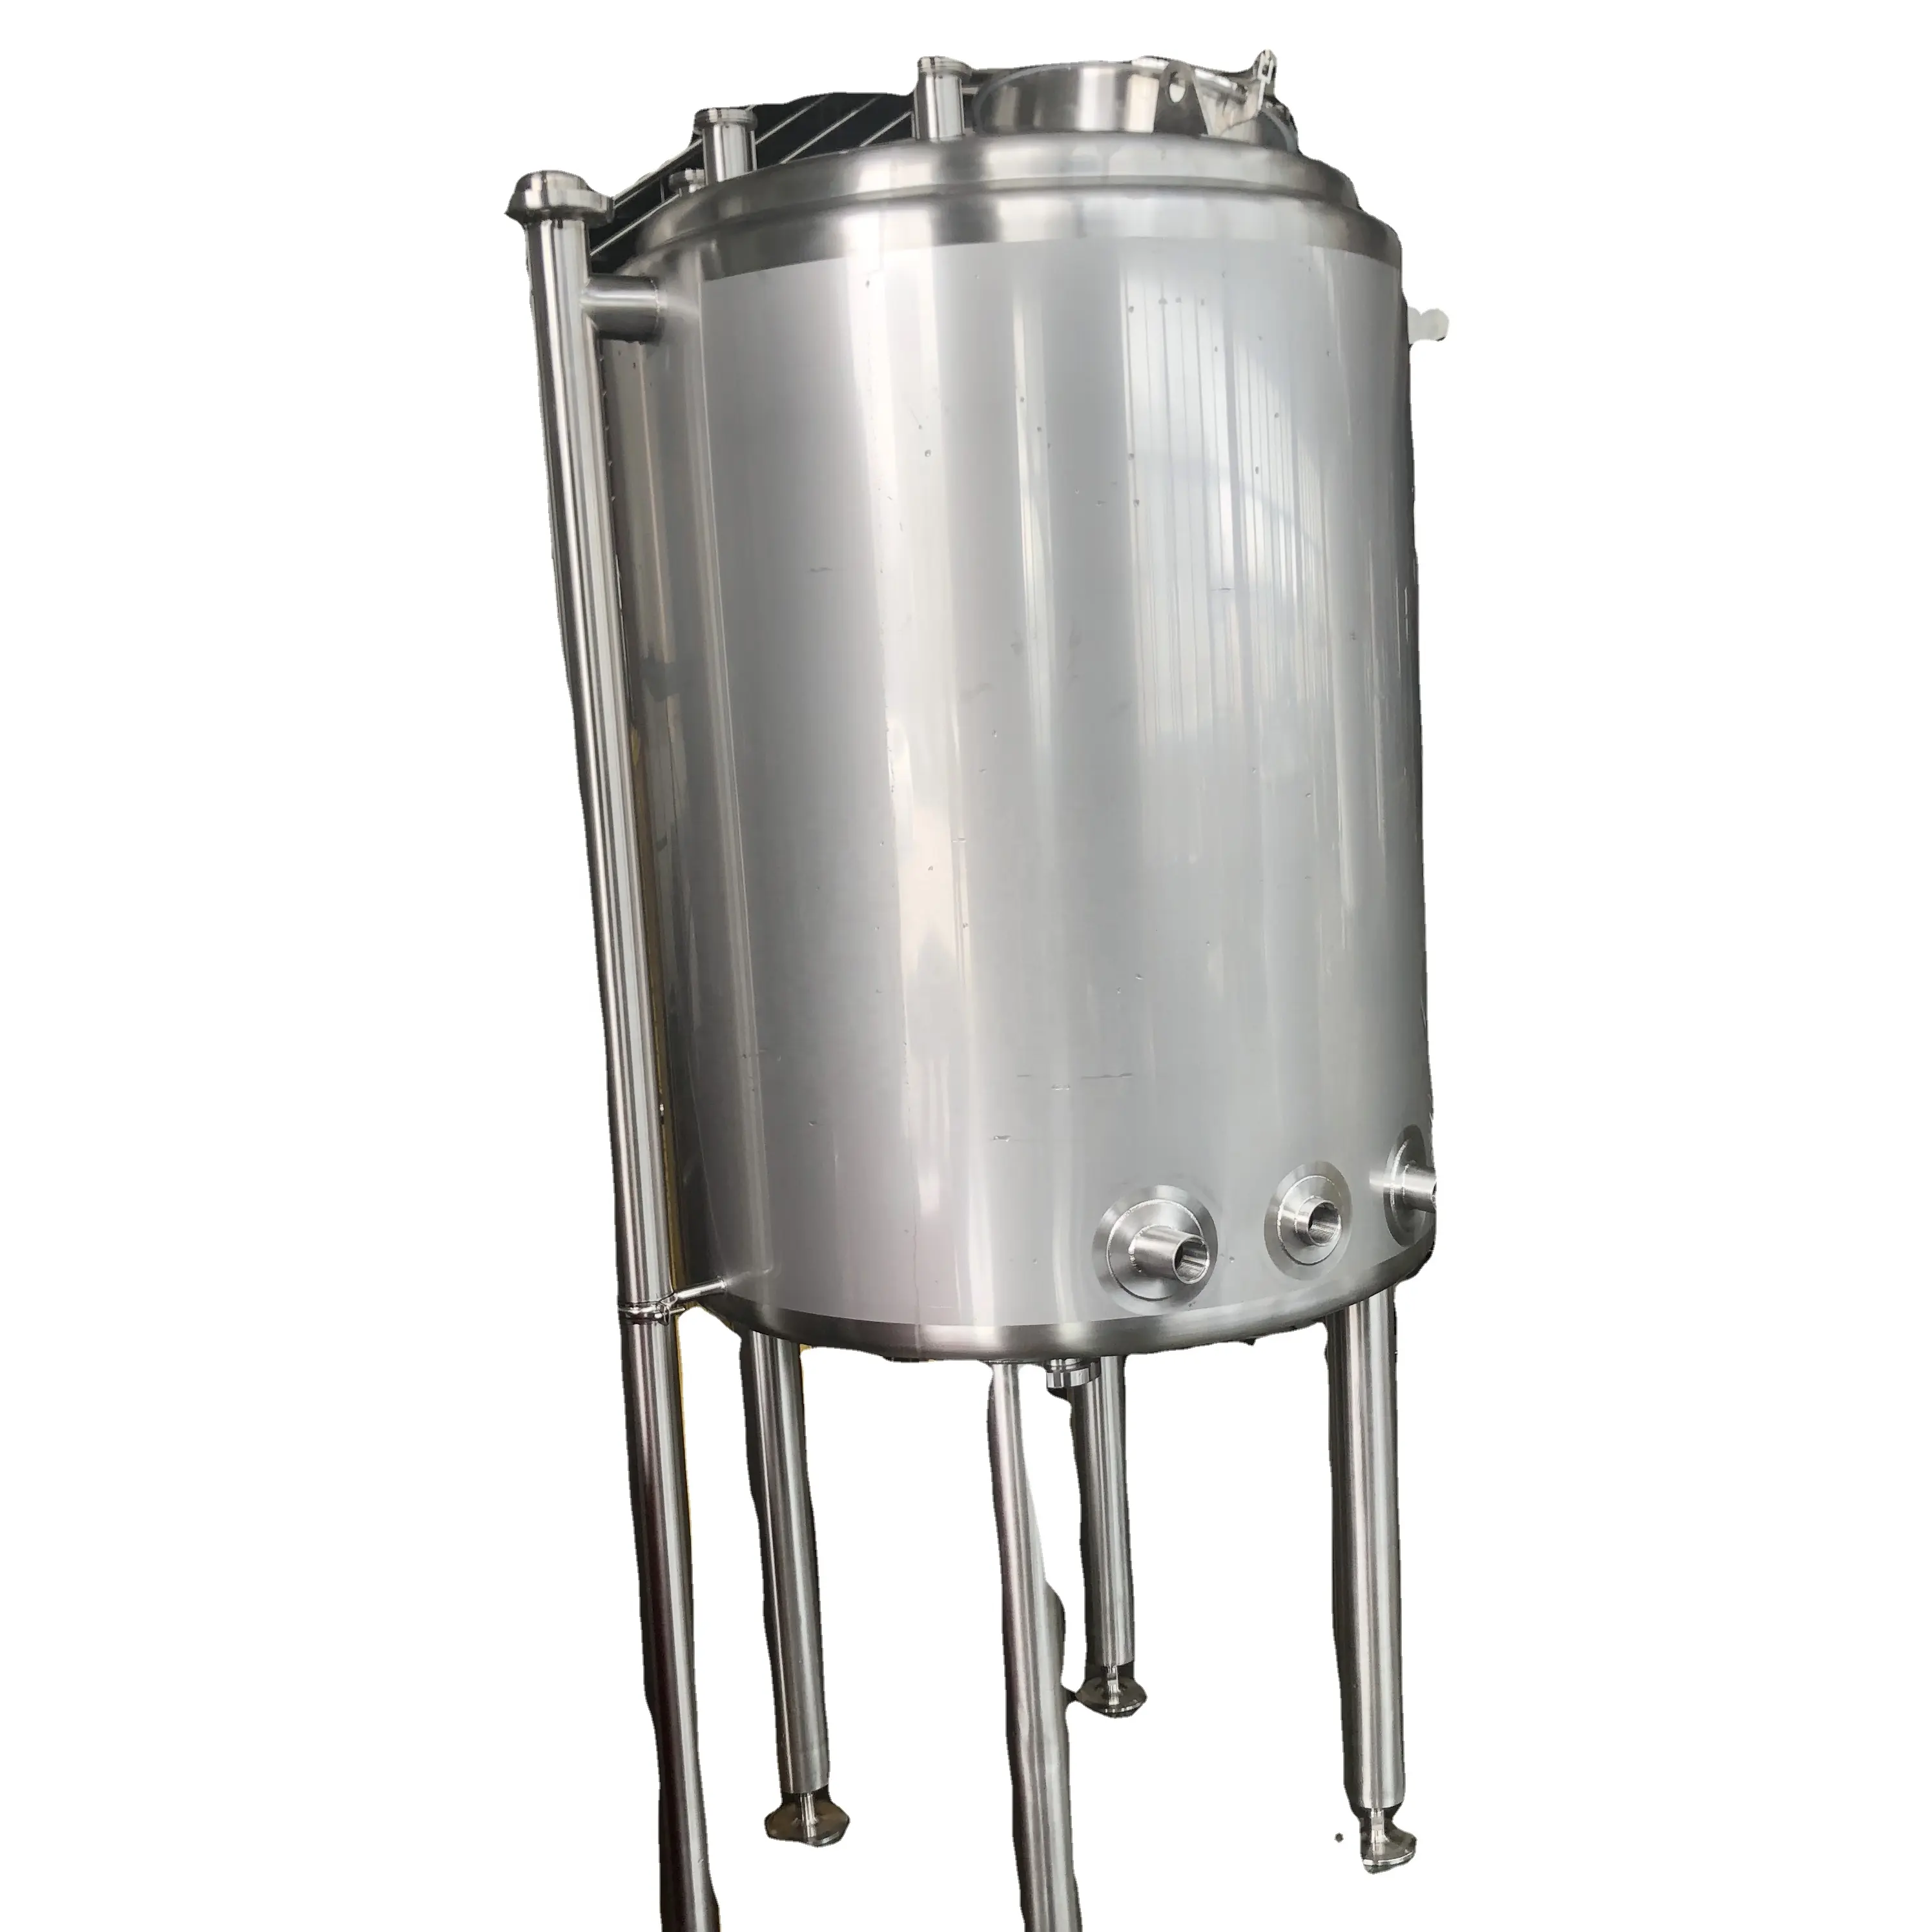 Stainless Steel Insulated Storage Tank Water Tank Chemical Storage Tank Vertical Type